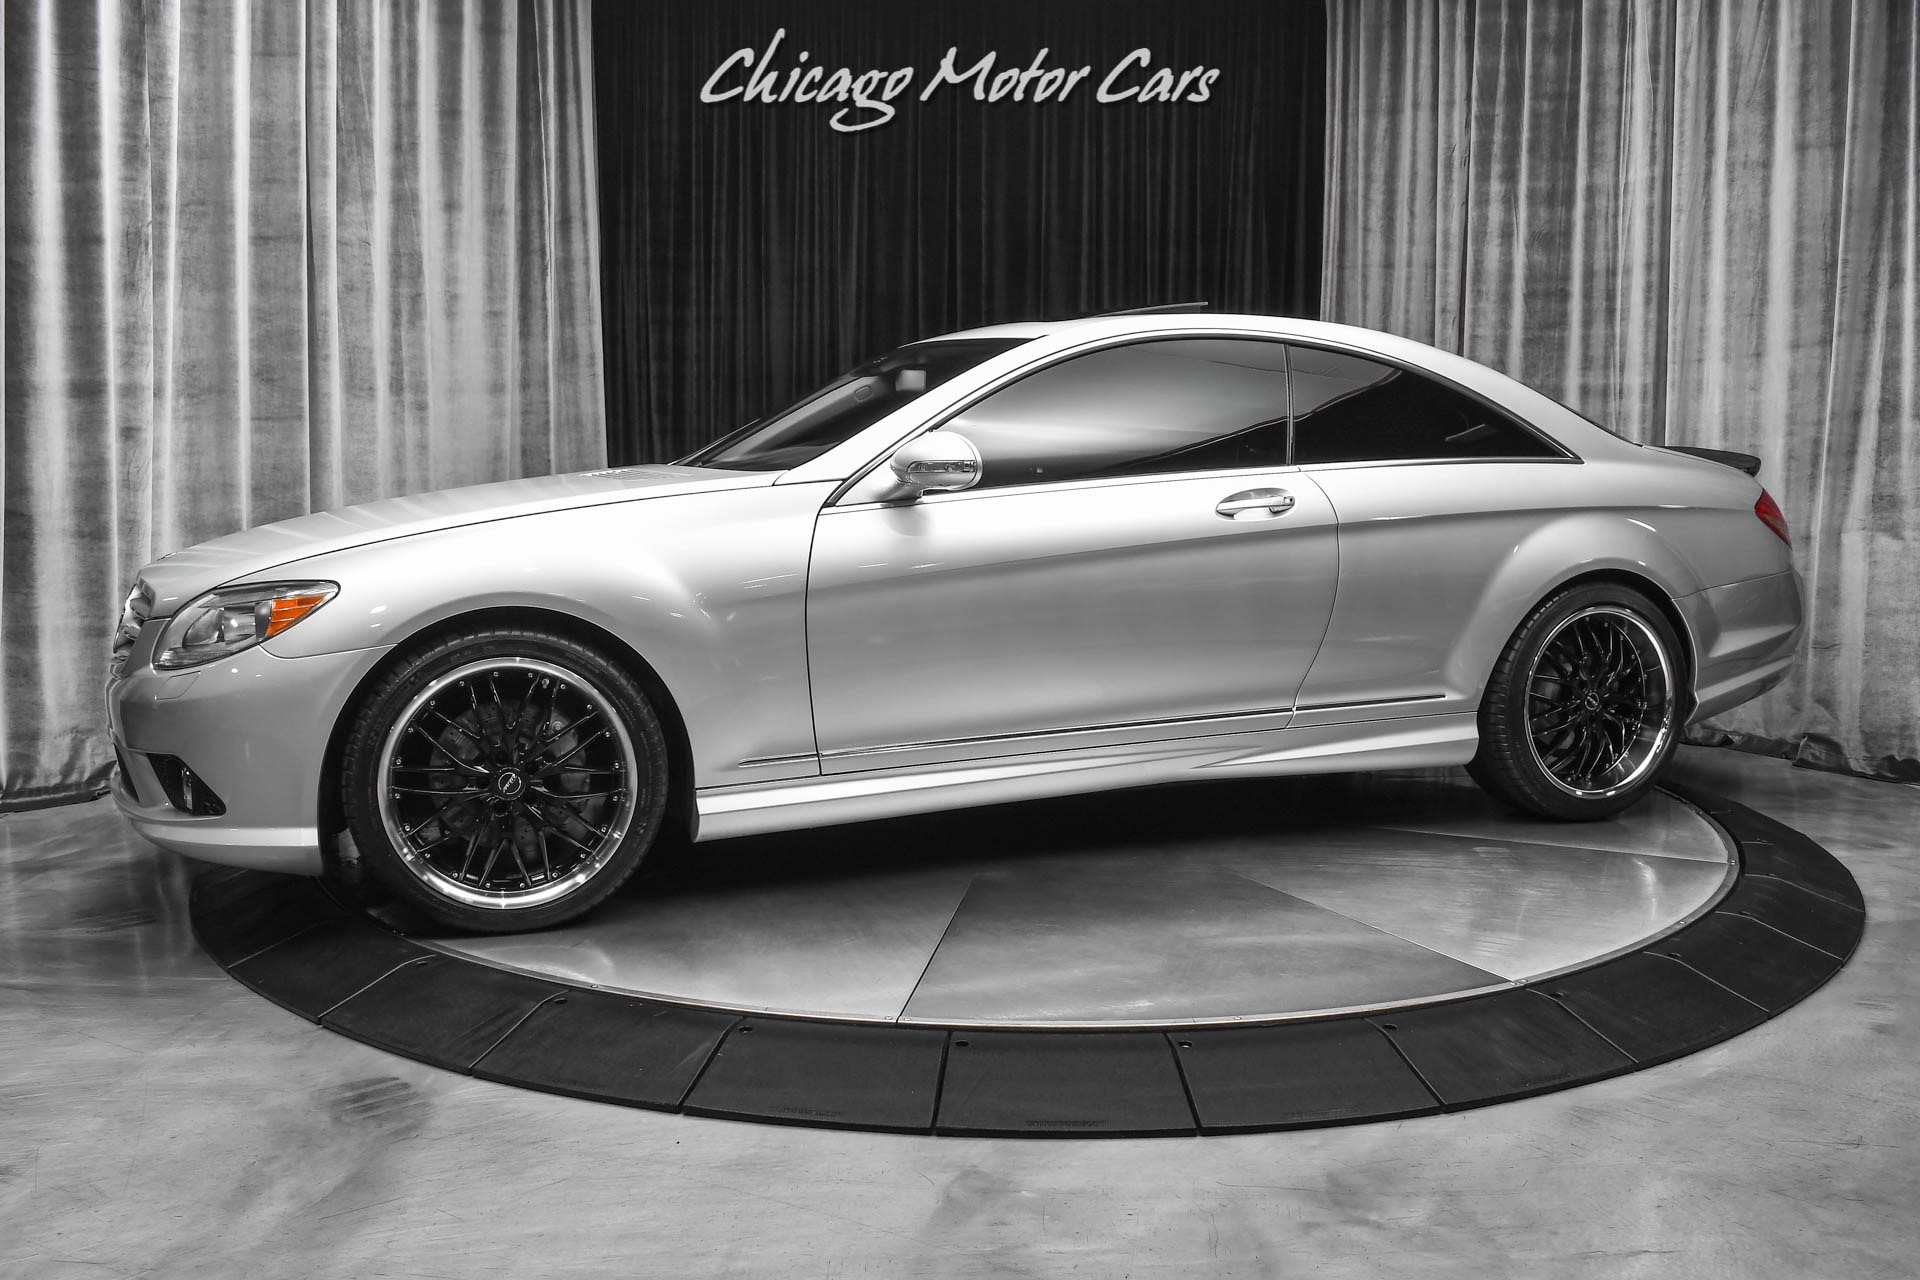 Used 2007 Mercedes-Benz CL-Class CL 550 Coupe AMG Sport Pkg! Premium 2 Pkg!  Distronic Plus! For Sale (Special Pricing) | Chicago Motor Cars Stock #19559